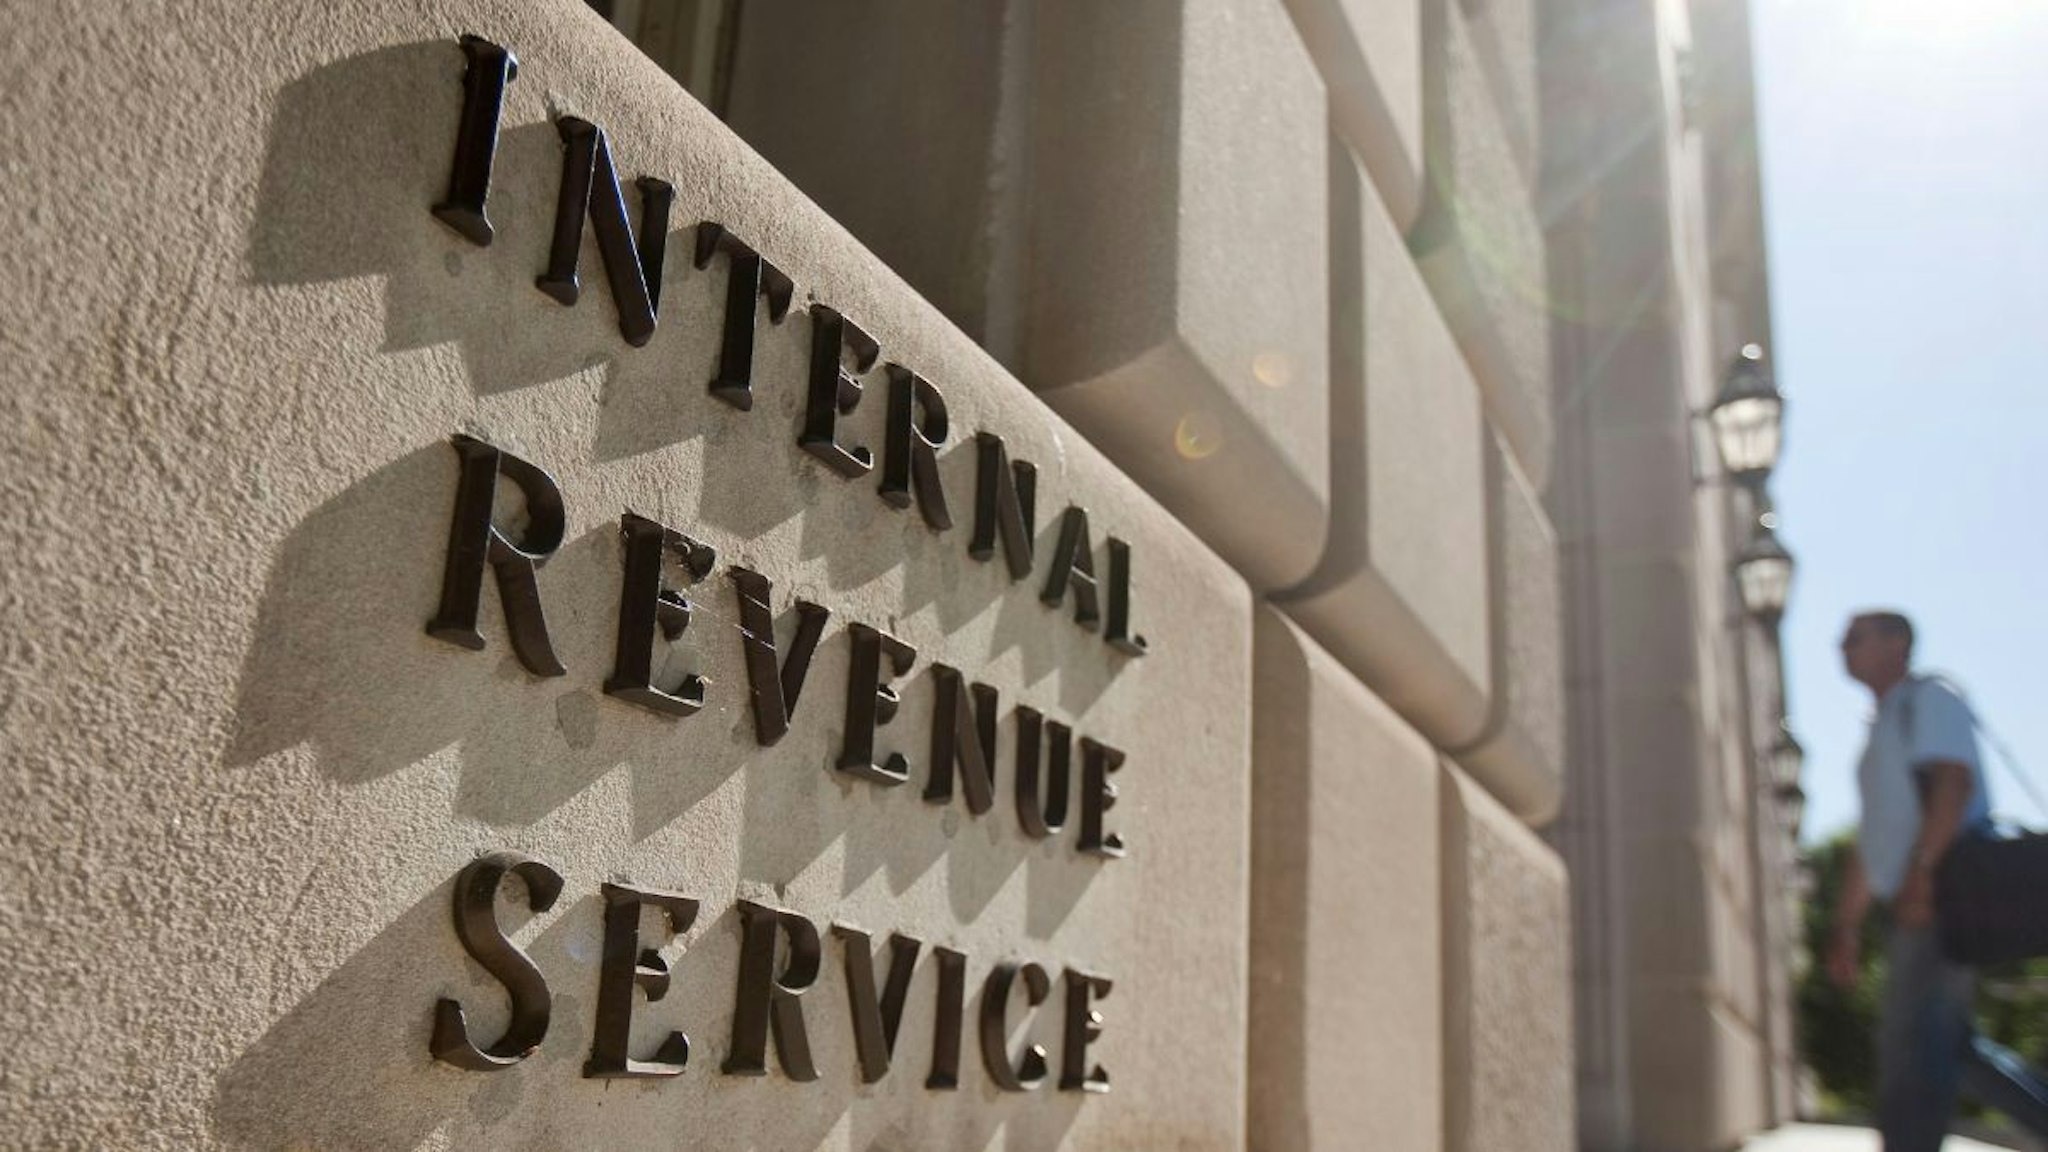 A man enters the Internal Revenue Service (IRS) building in Washington, D.C., U.S., on Friday, May 7, 2010.